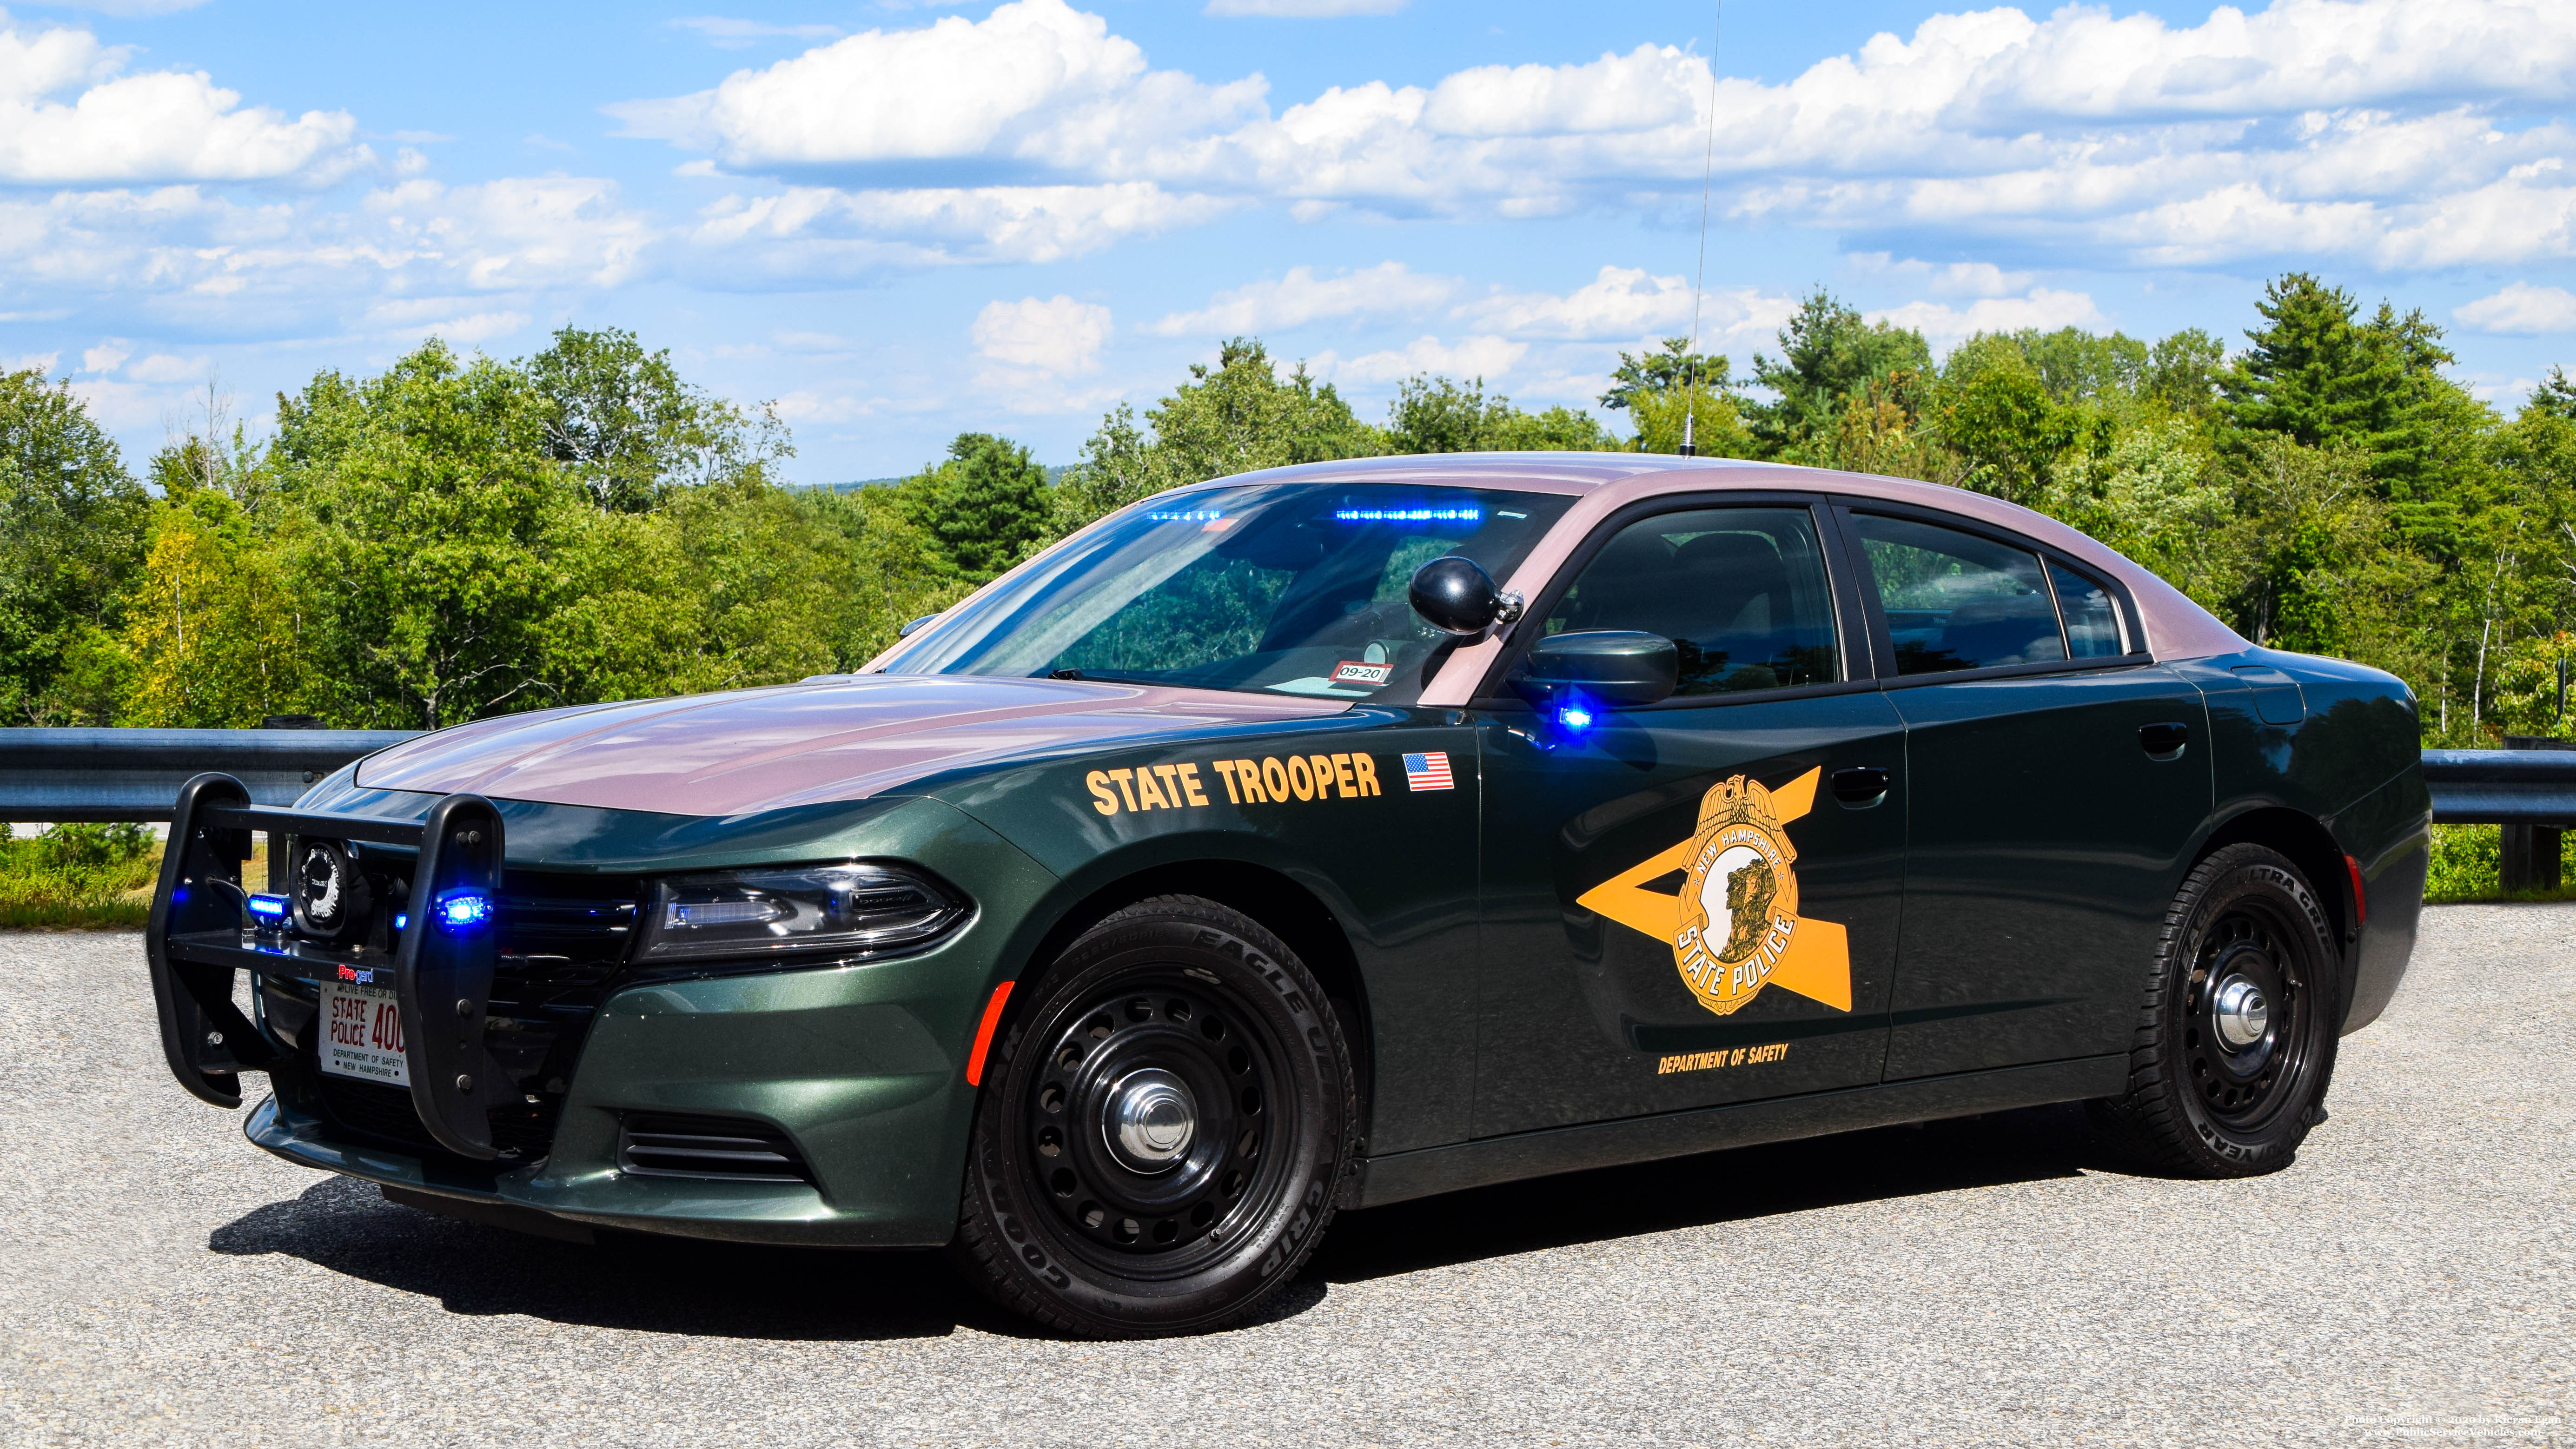 A photo  of New Hampshire State Police
            Cruiser 400, a 2016 Dodge Charger             taken by Kieran Egan